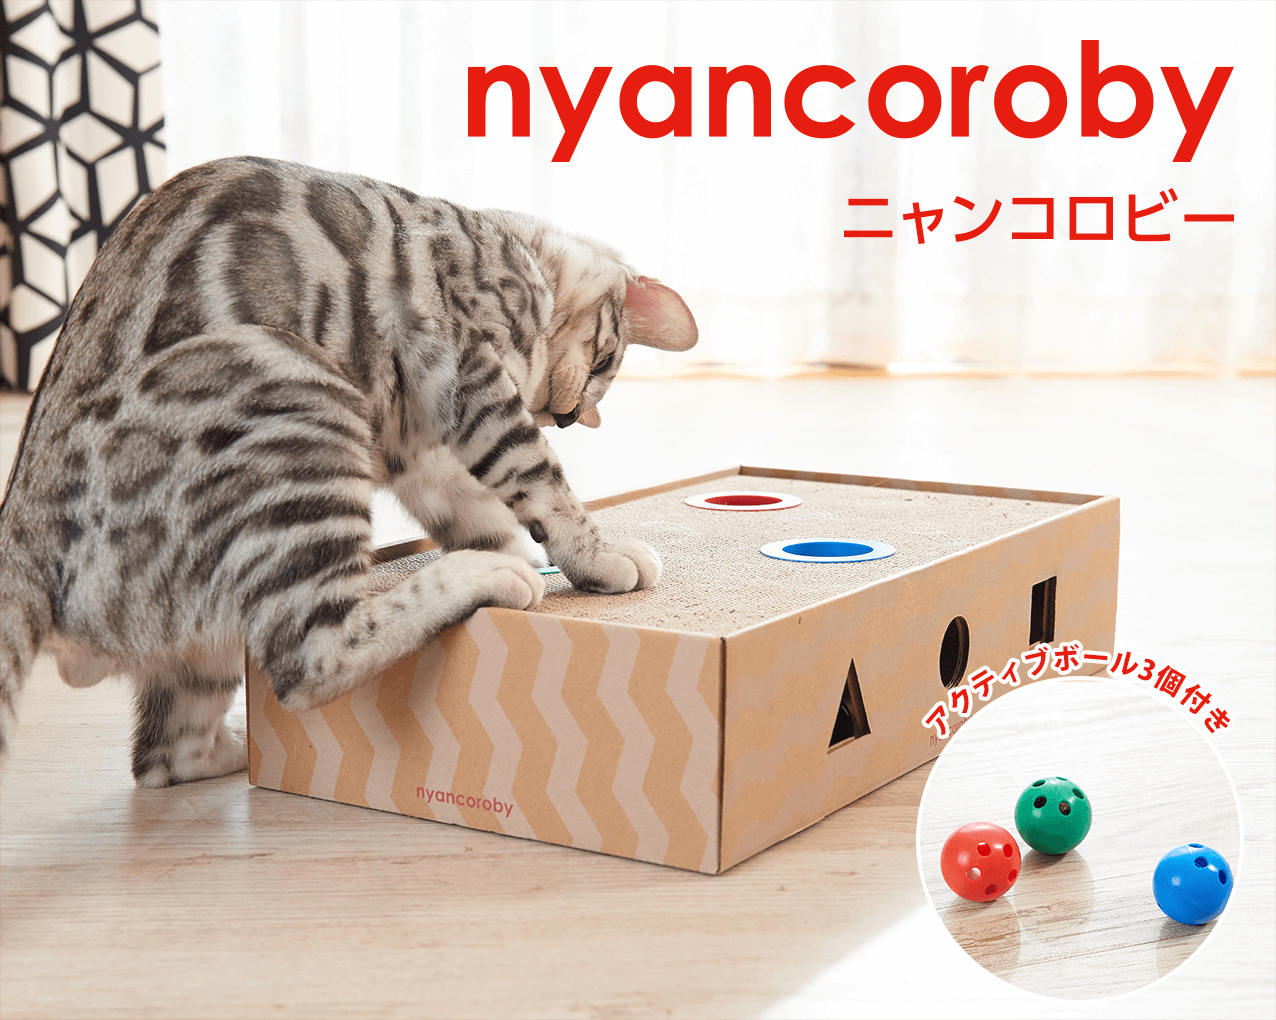 nyancoroby jRr[